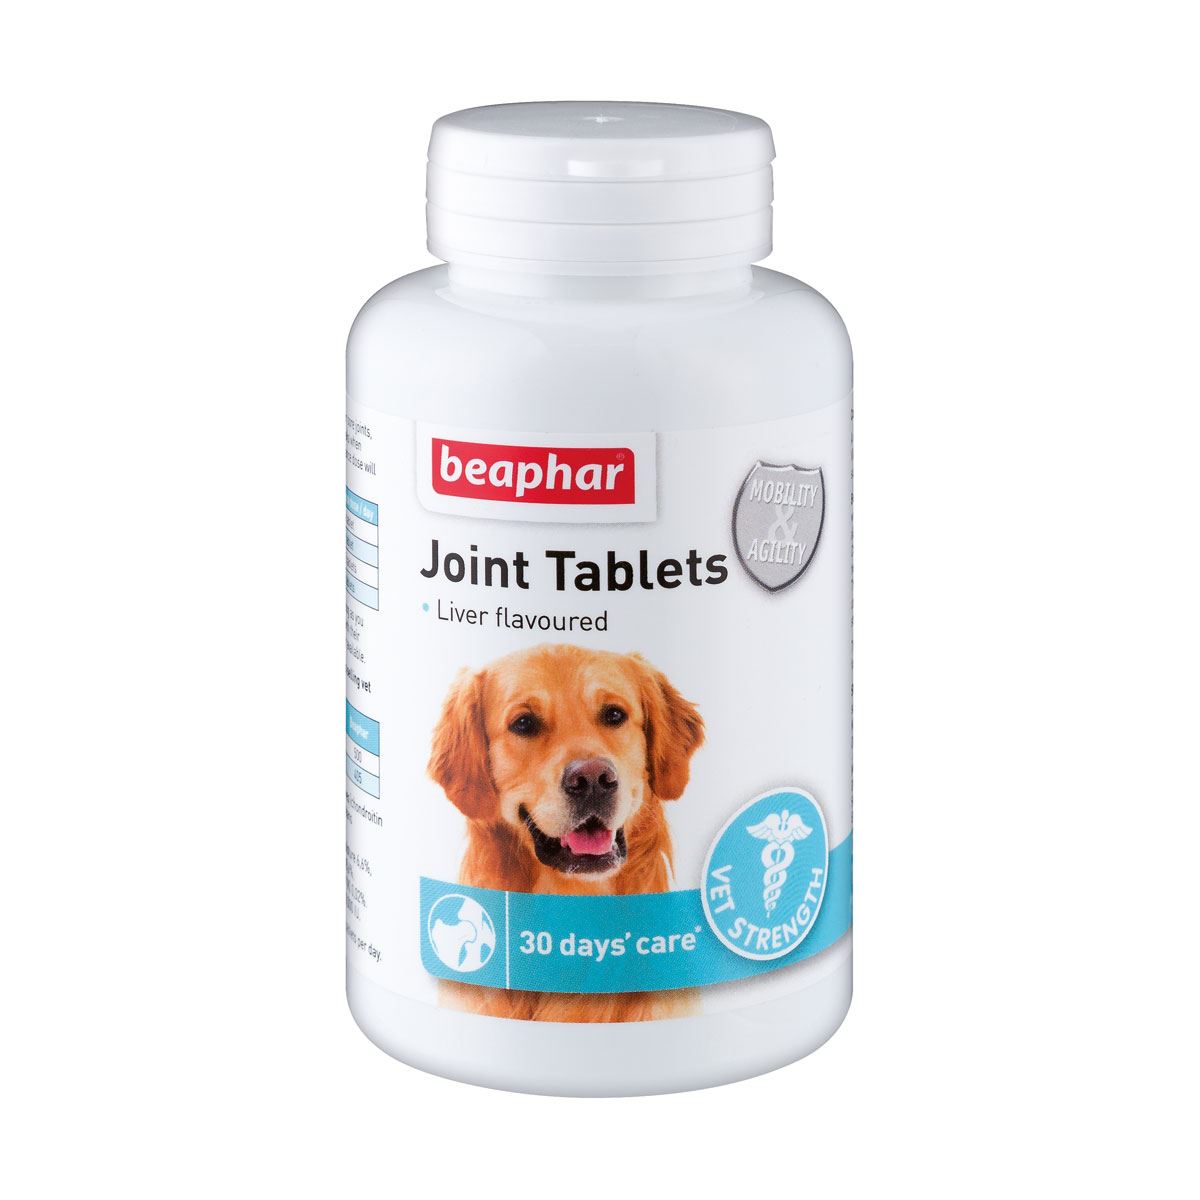 Beaphar Joint Tablets - Just Horse Riders